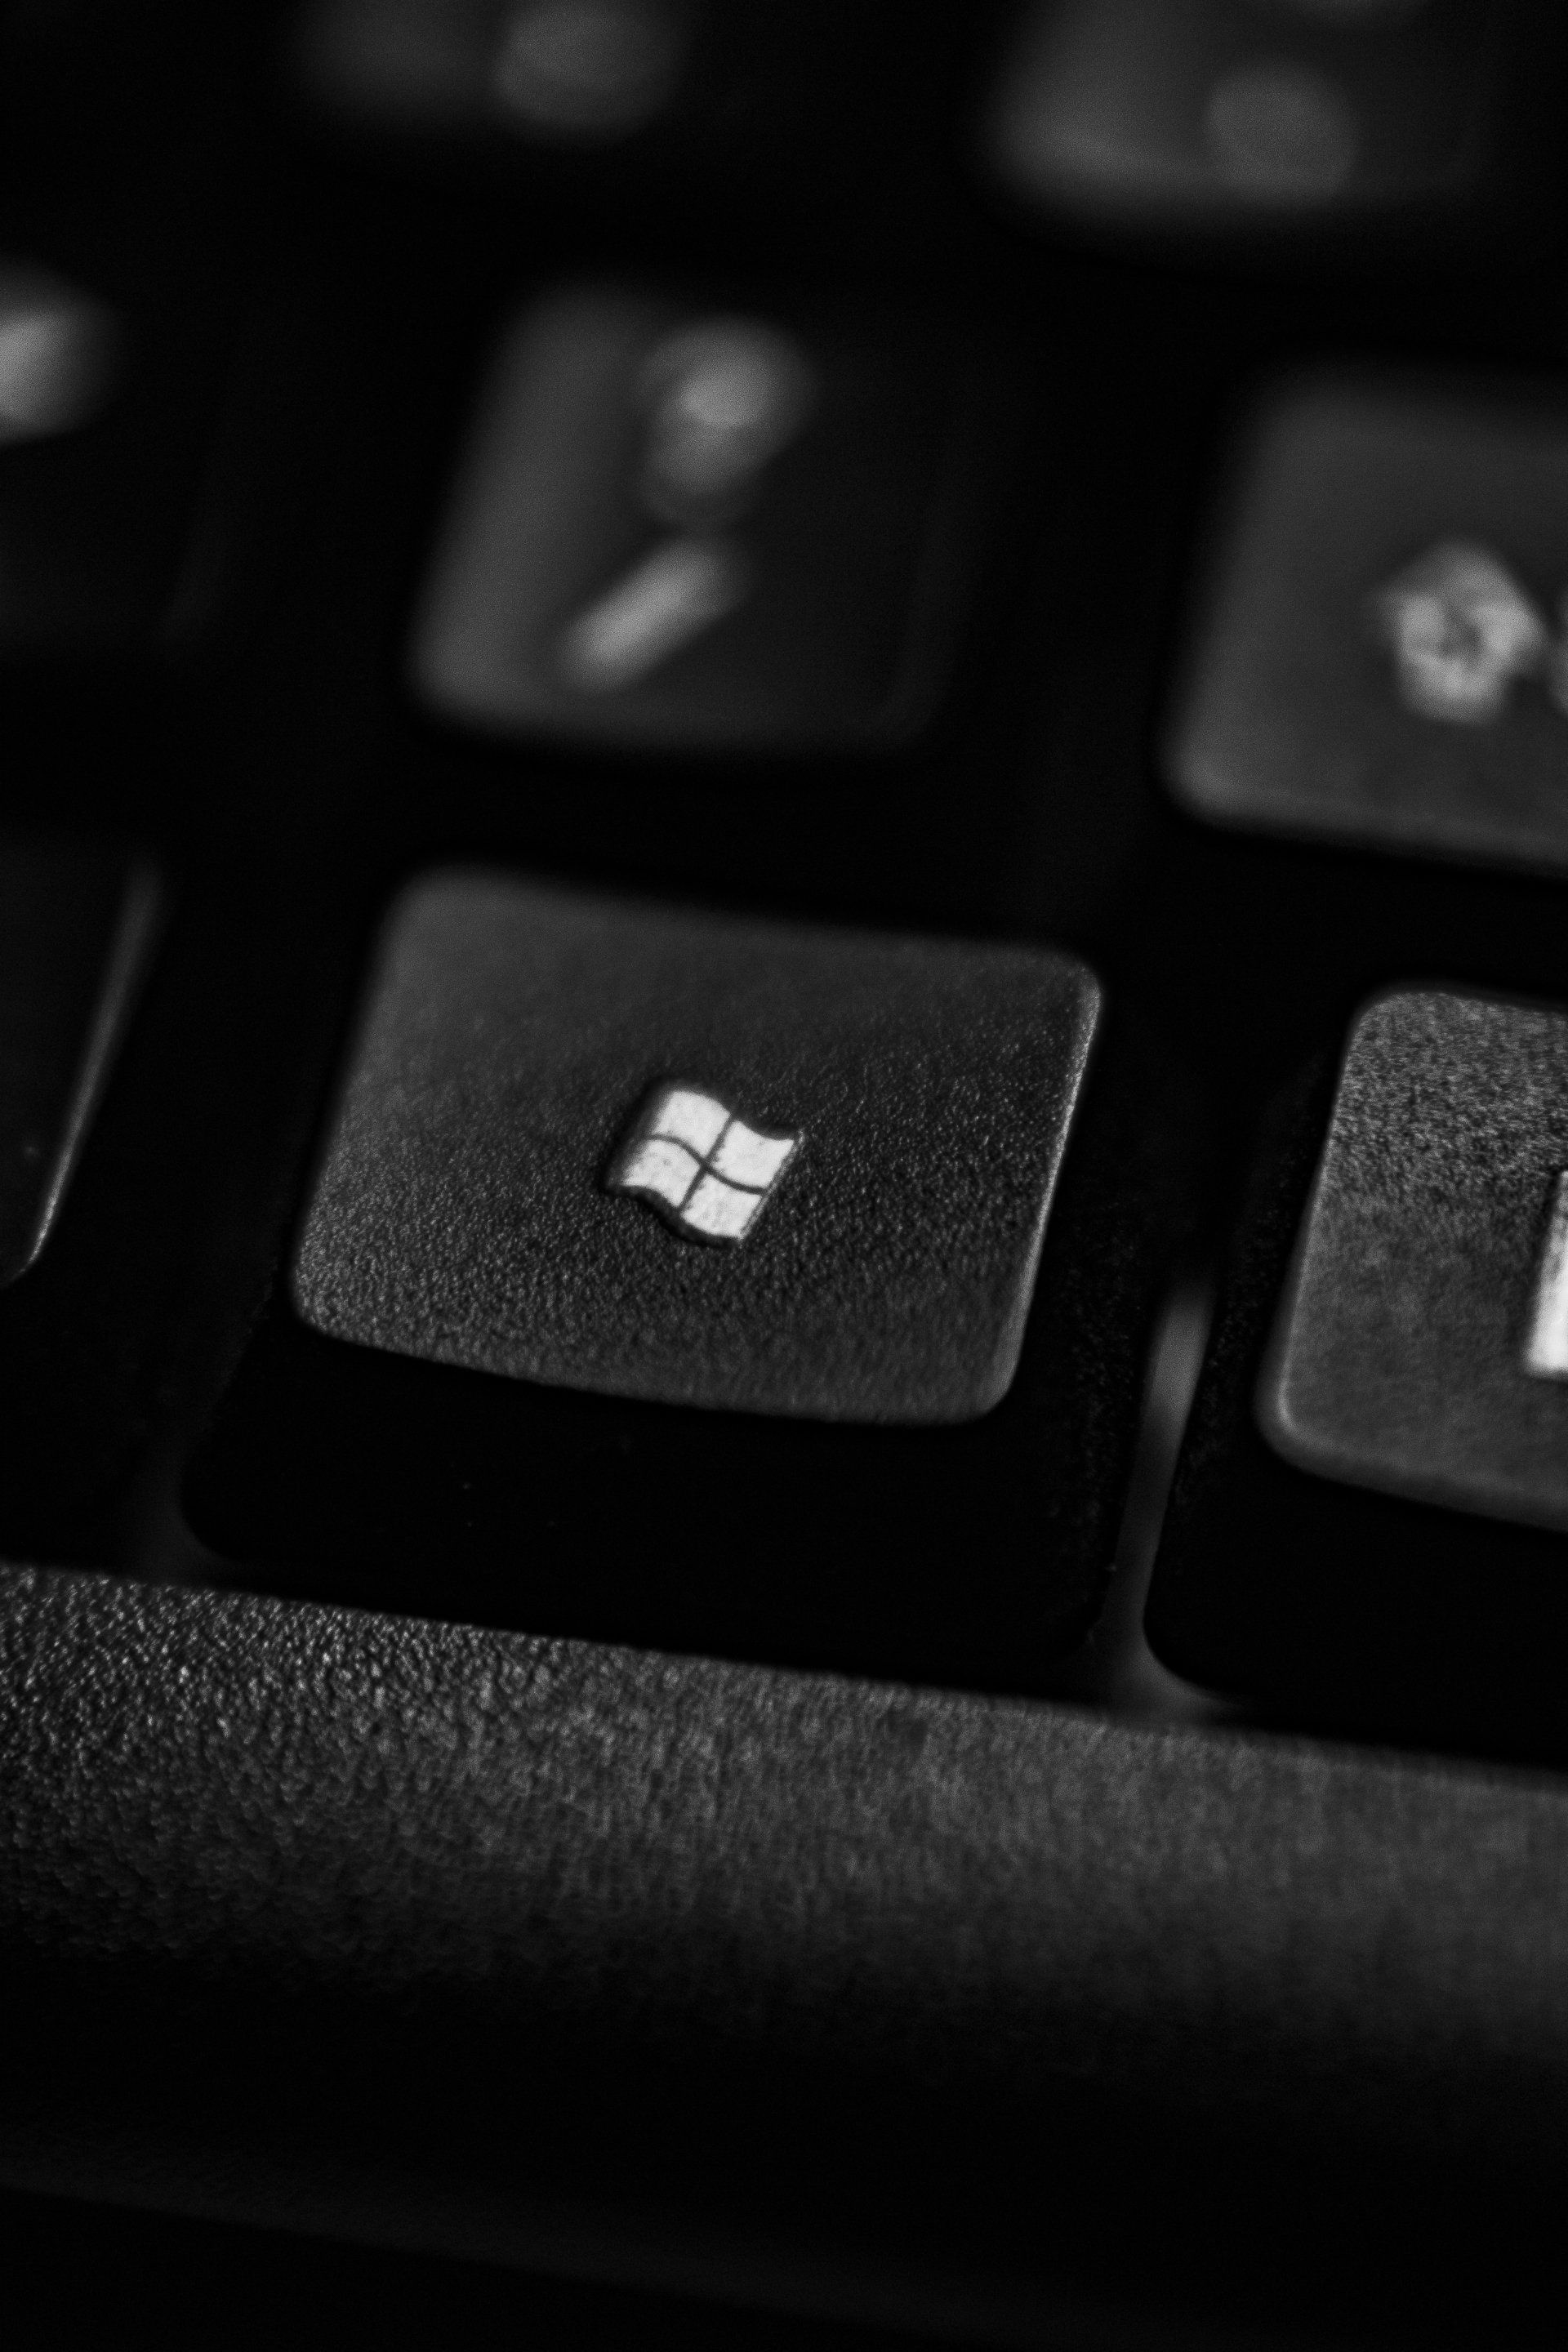 a close up of a black keyboard with a windows key